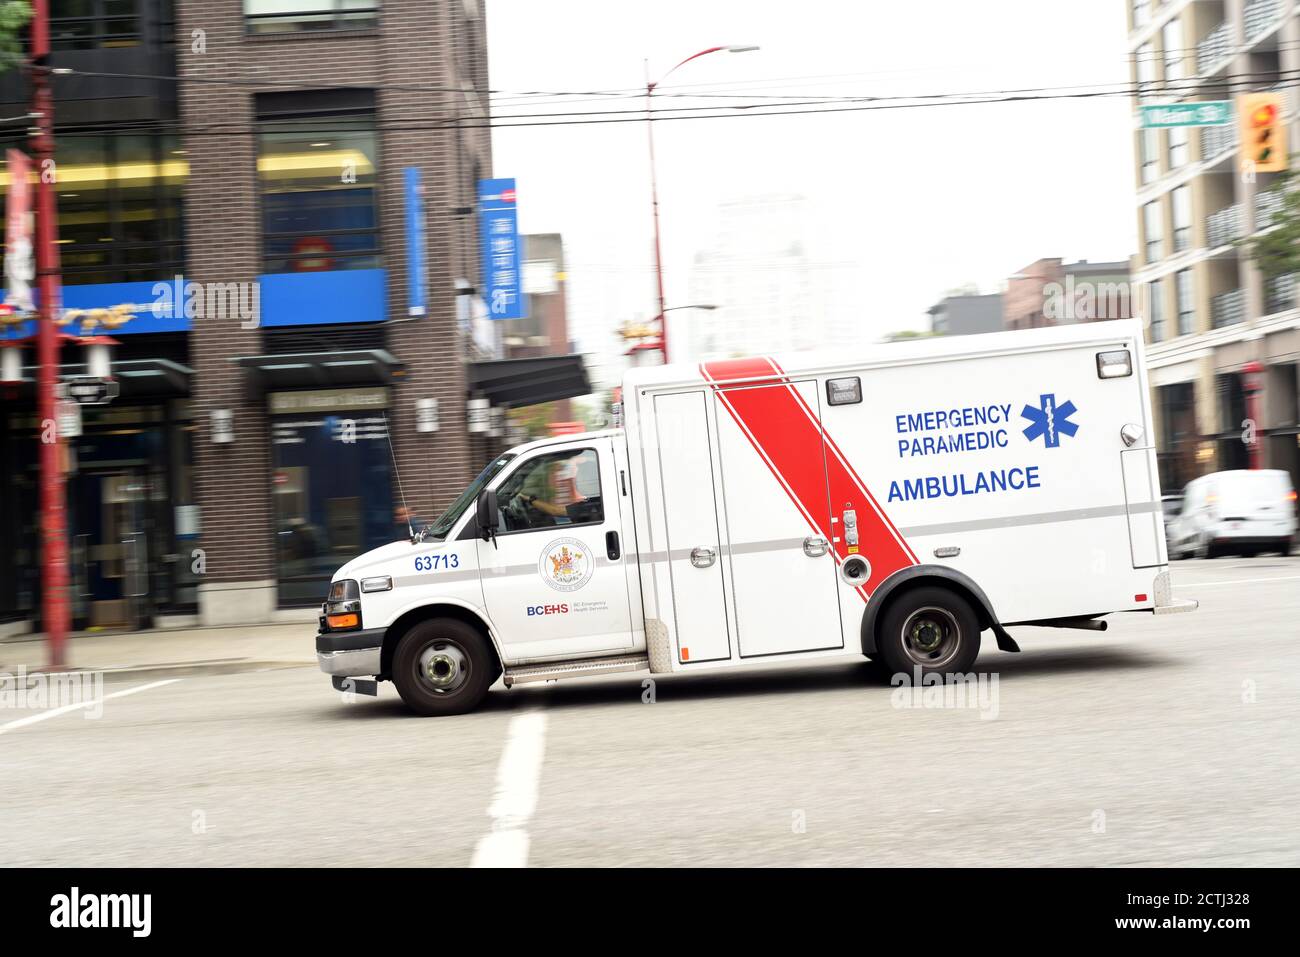 An emergency paramedic ambulance rushes to an incident scene along Main Street in Vancouver, British Columbia, Canada Stock Photo